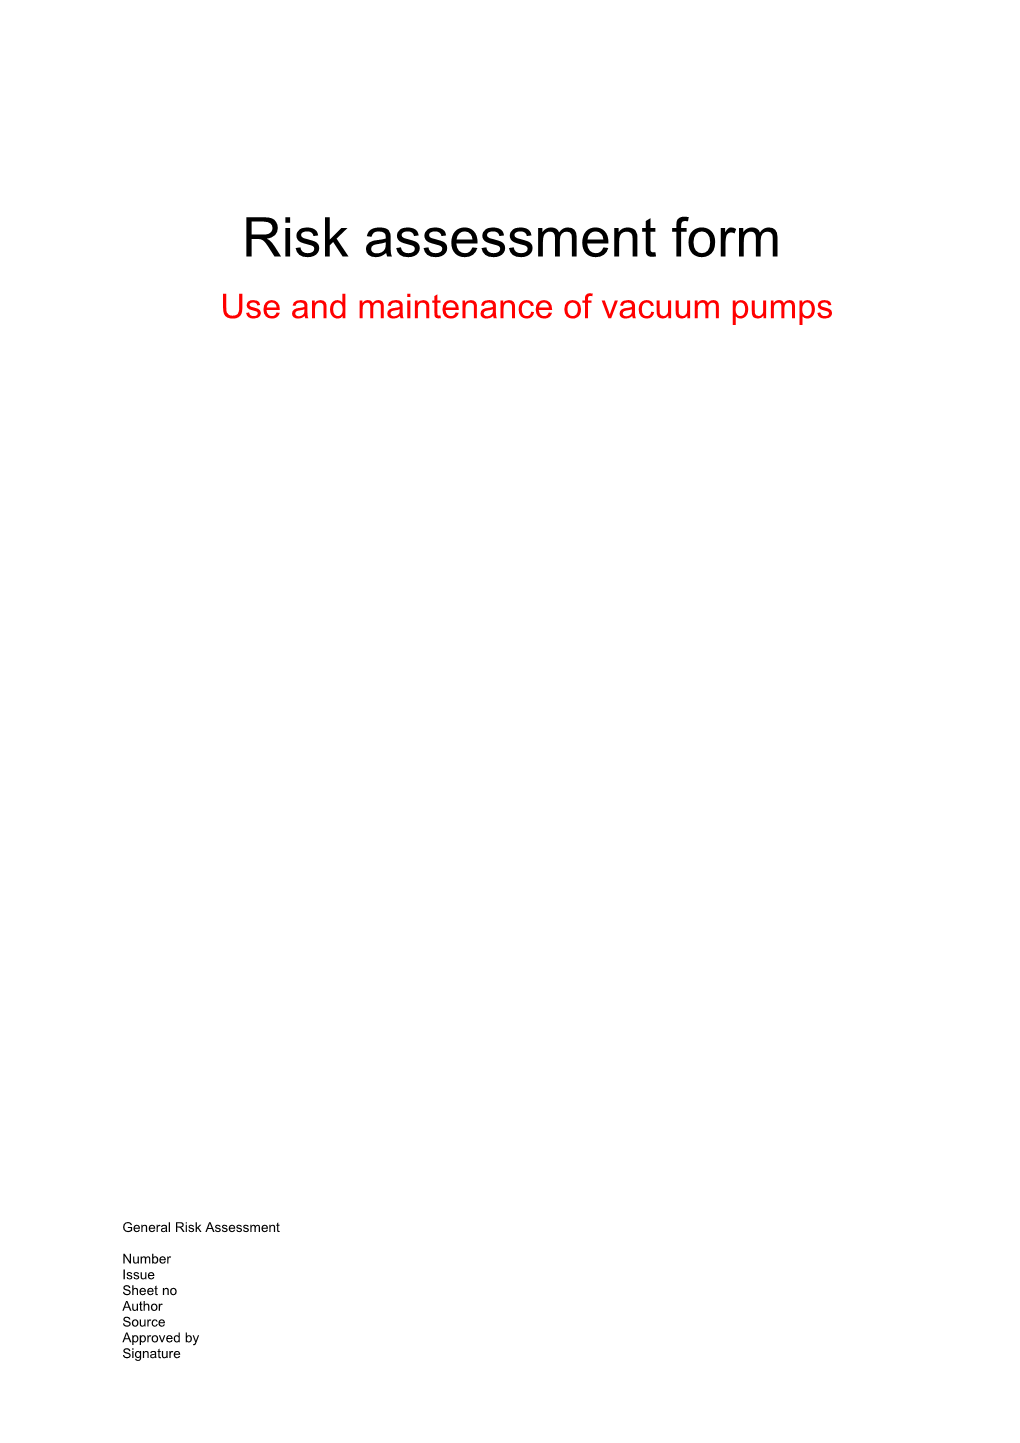 Risk Assessment Form School of Earth and Environment